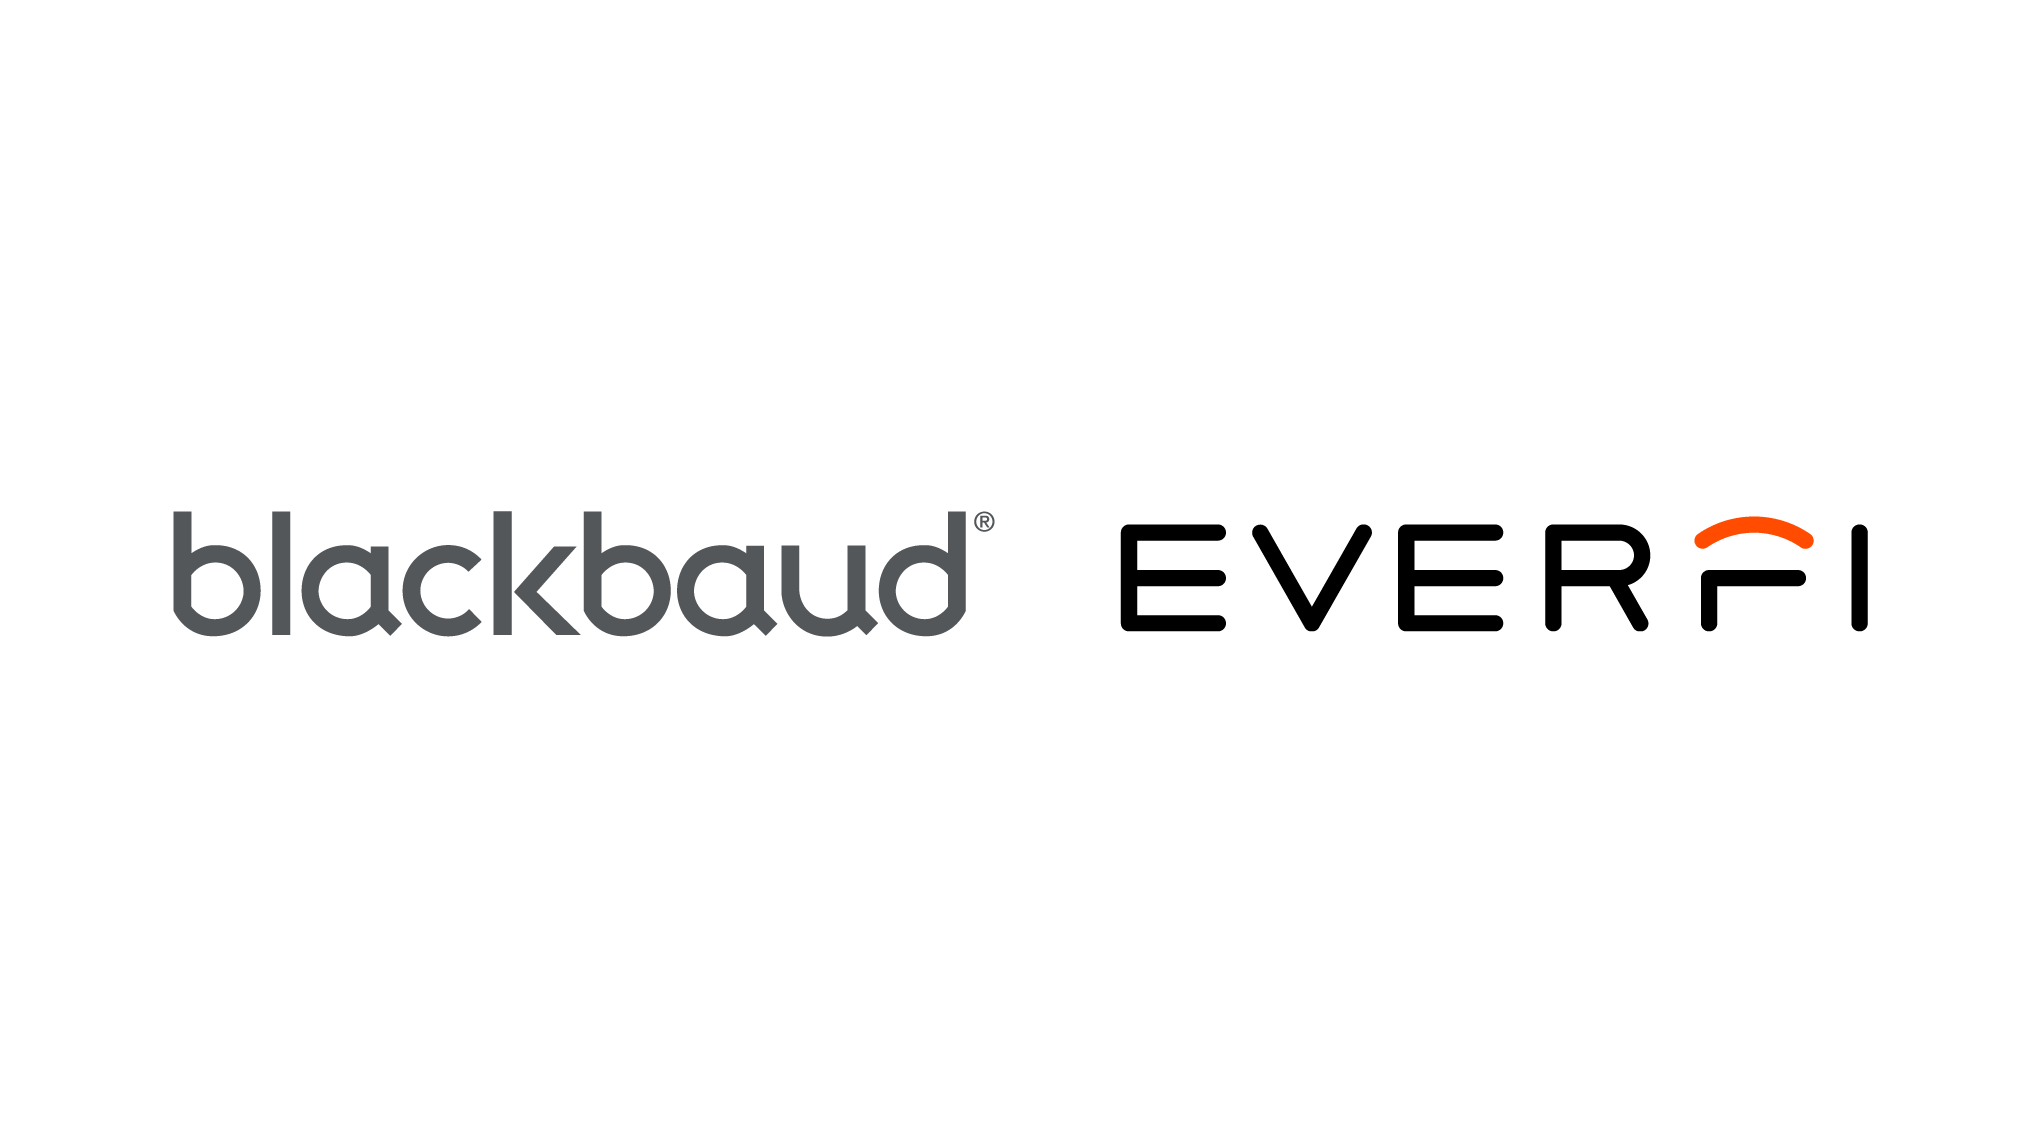 Cloud Software Firm Blackbaud Acquires Washington Dc-based Edtech Everfi for $750m - Cloud Software Firm Blackbaud Acquires Washington Dc-based Edtech Everfi for 0m